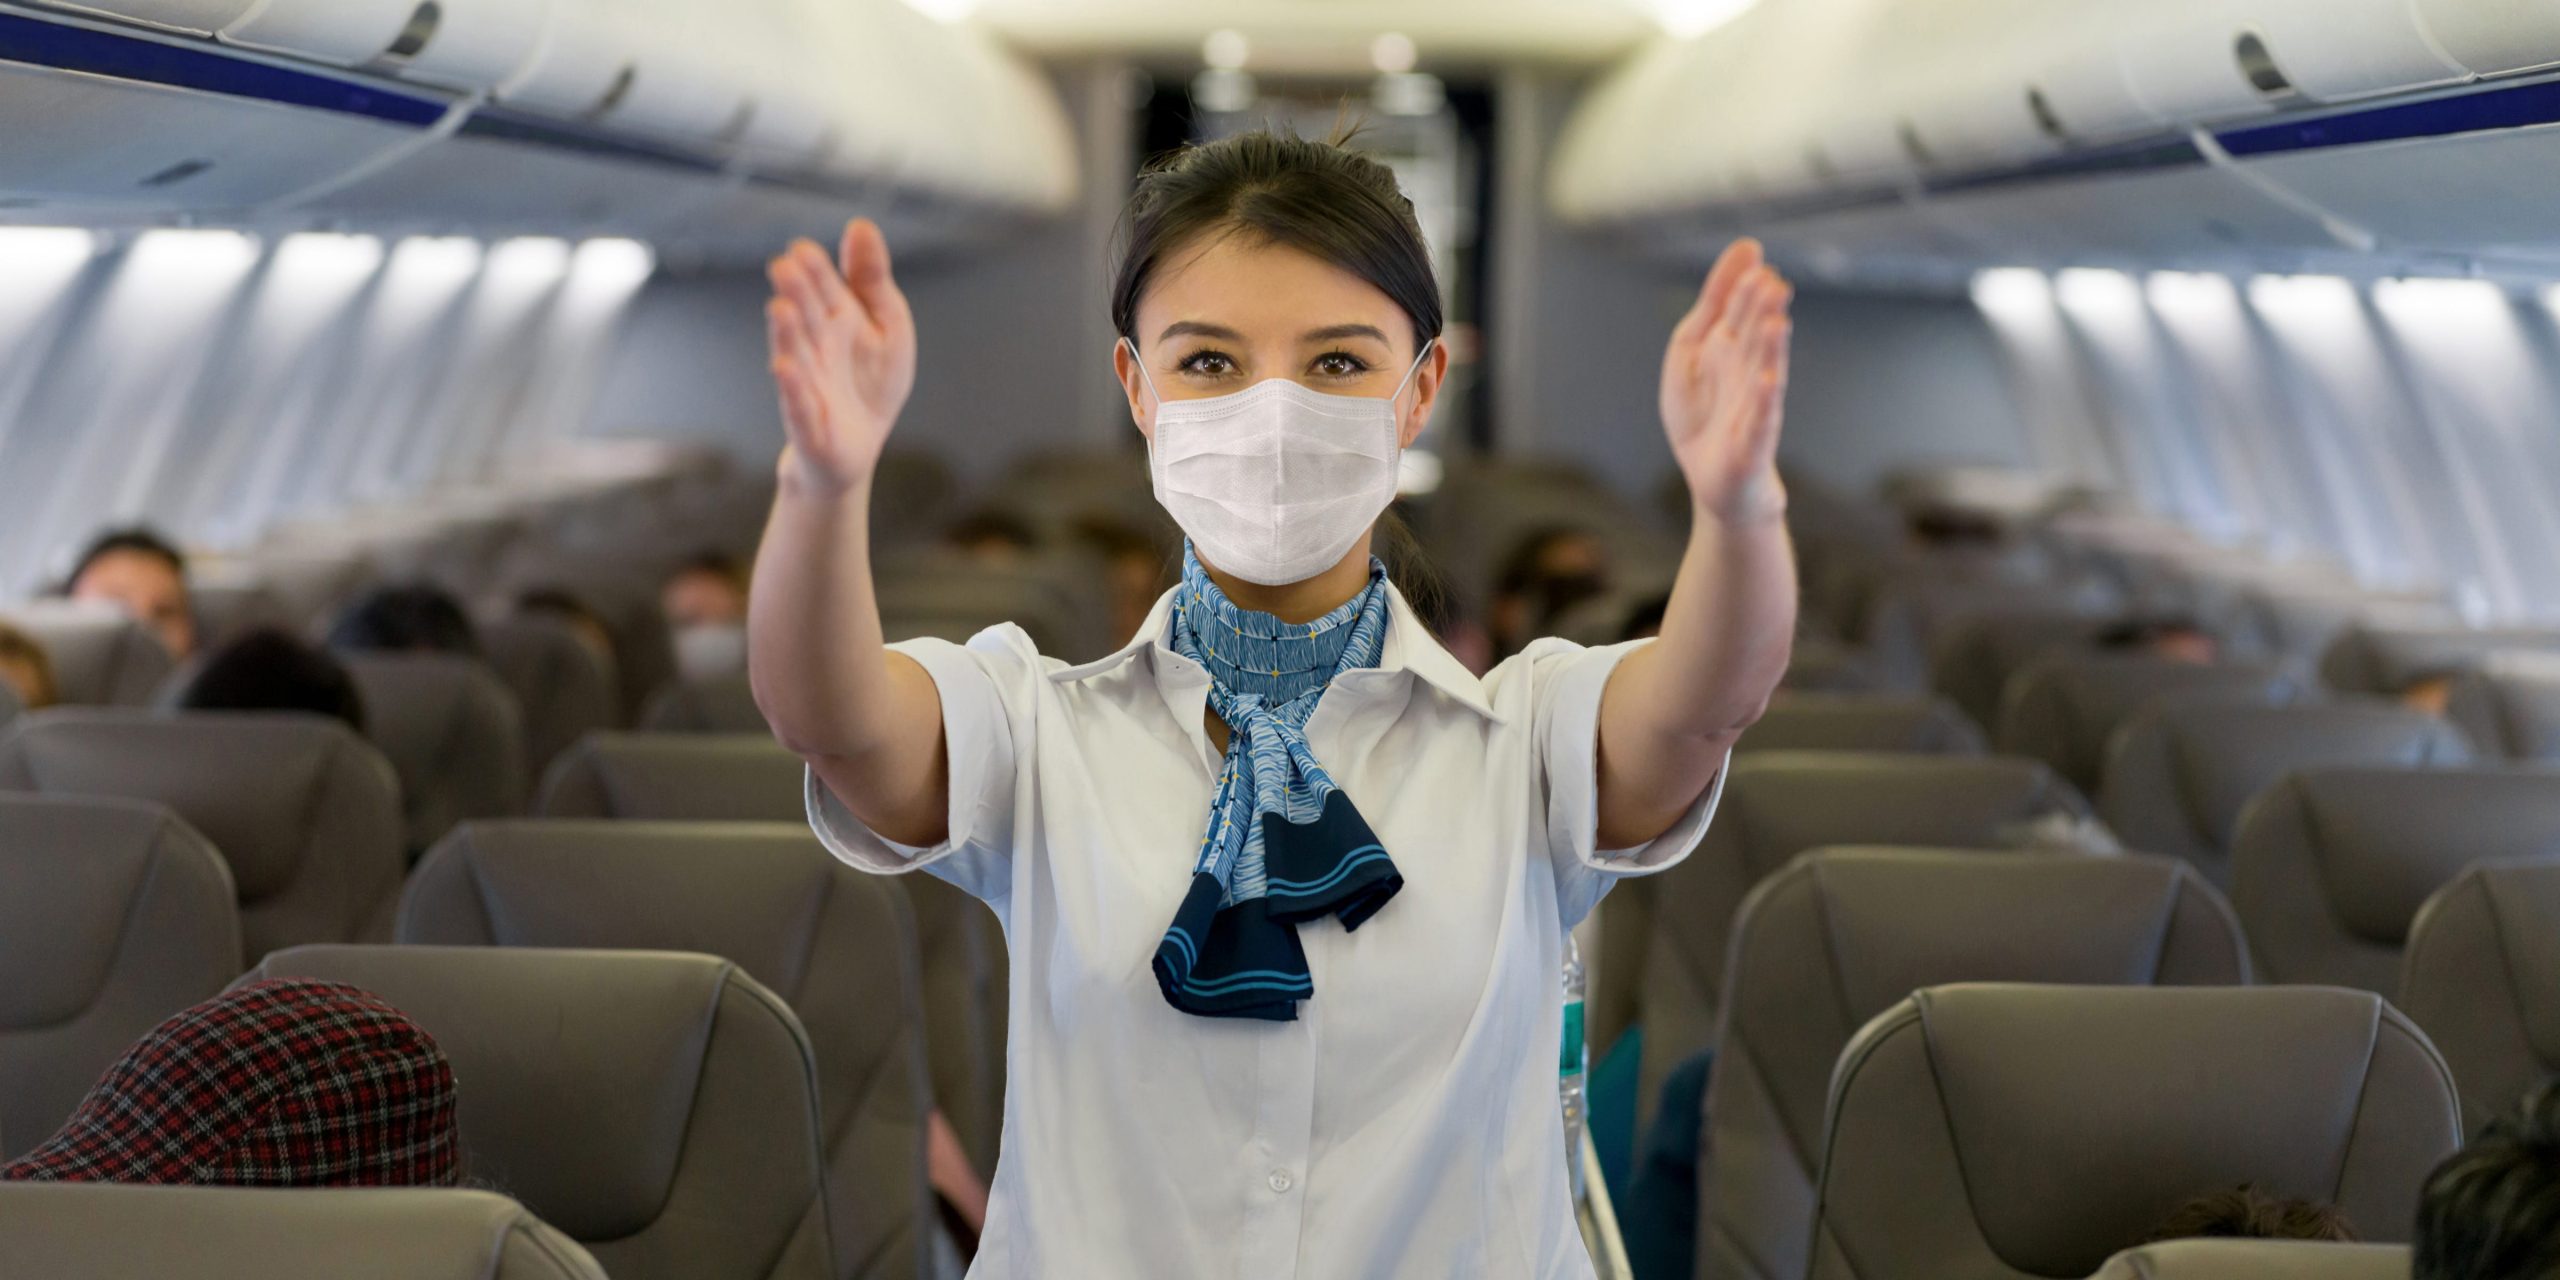 A woman flight attendants wearing a mask gestures towards the exits on an airplane.